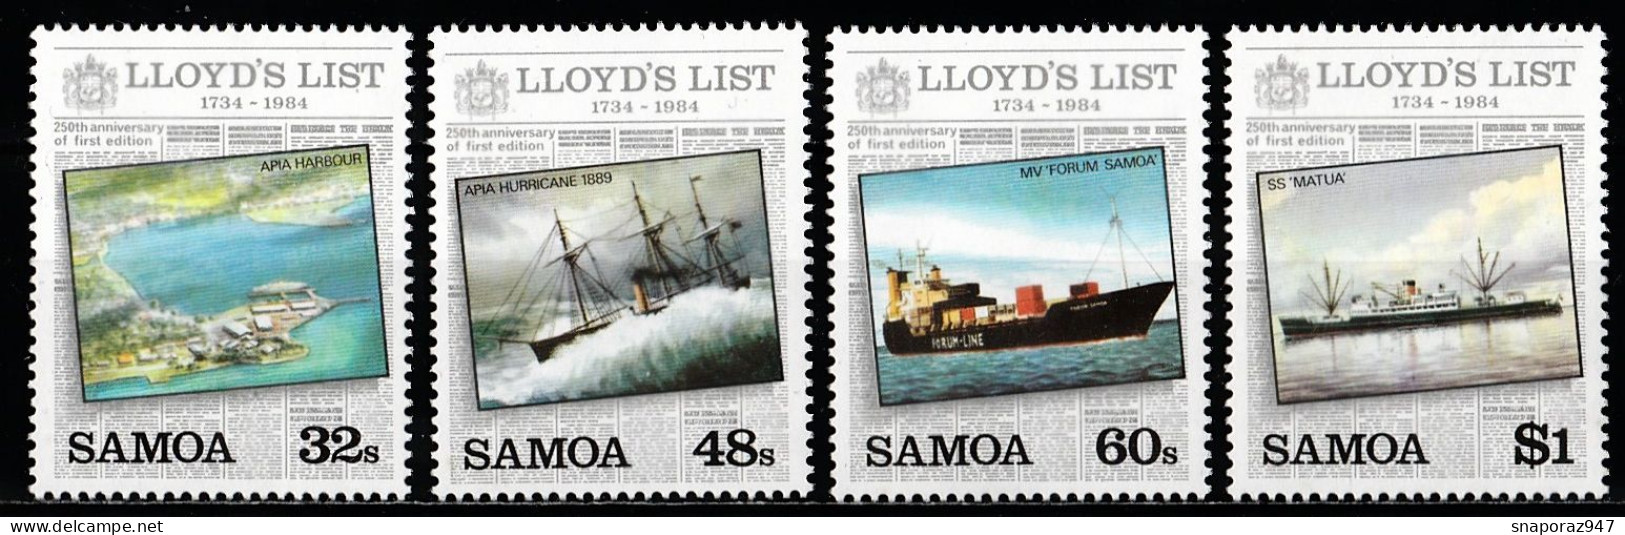 1984 Samoa Press 250th Of The 1st Edition Of The “Lioyd List” Set MNH** Tr145 - Neufs